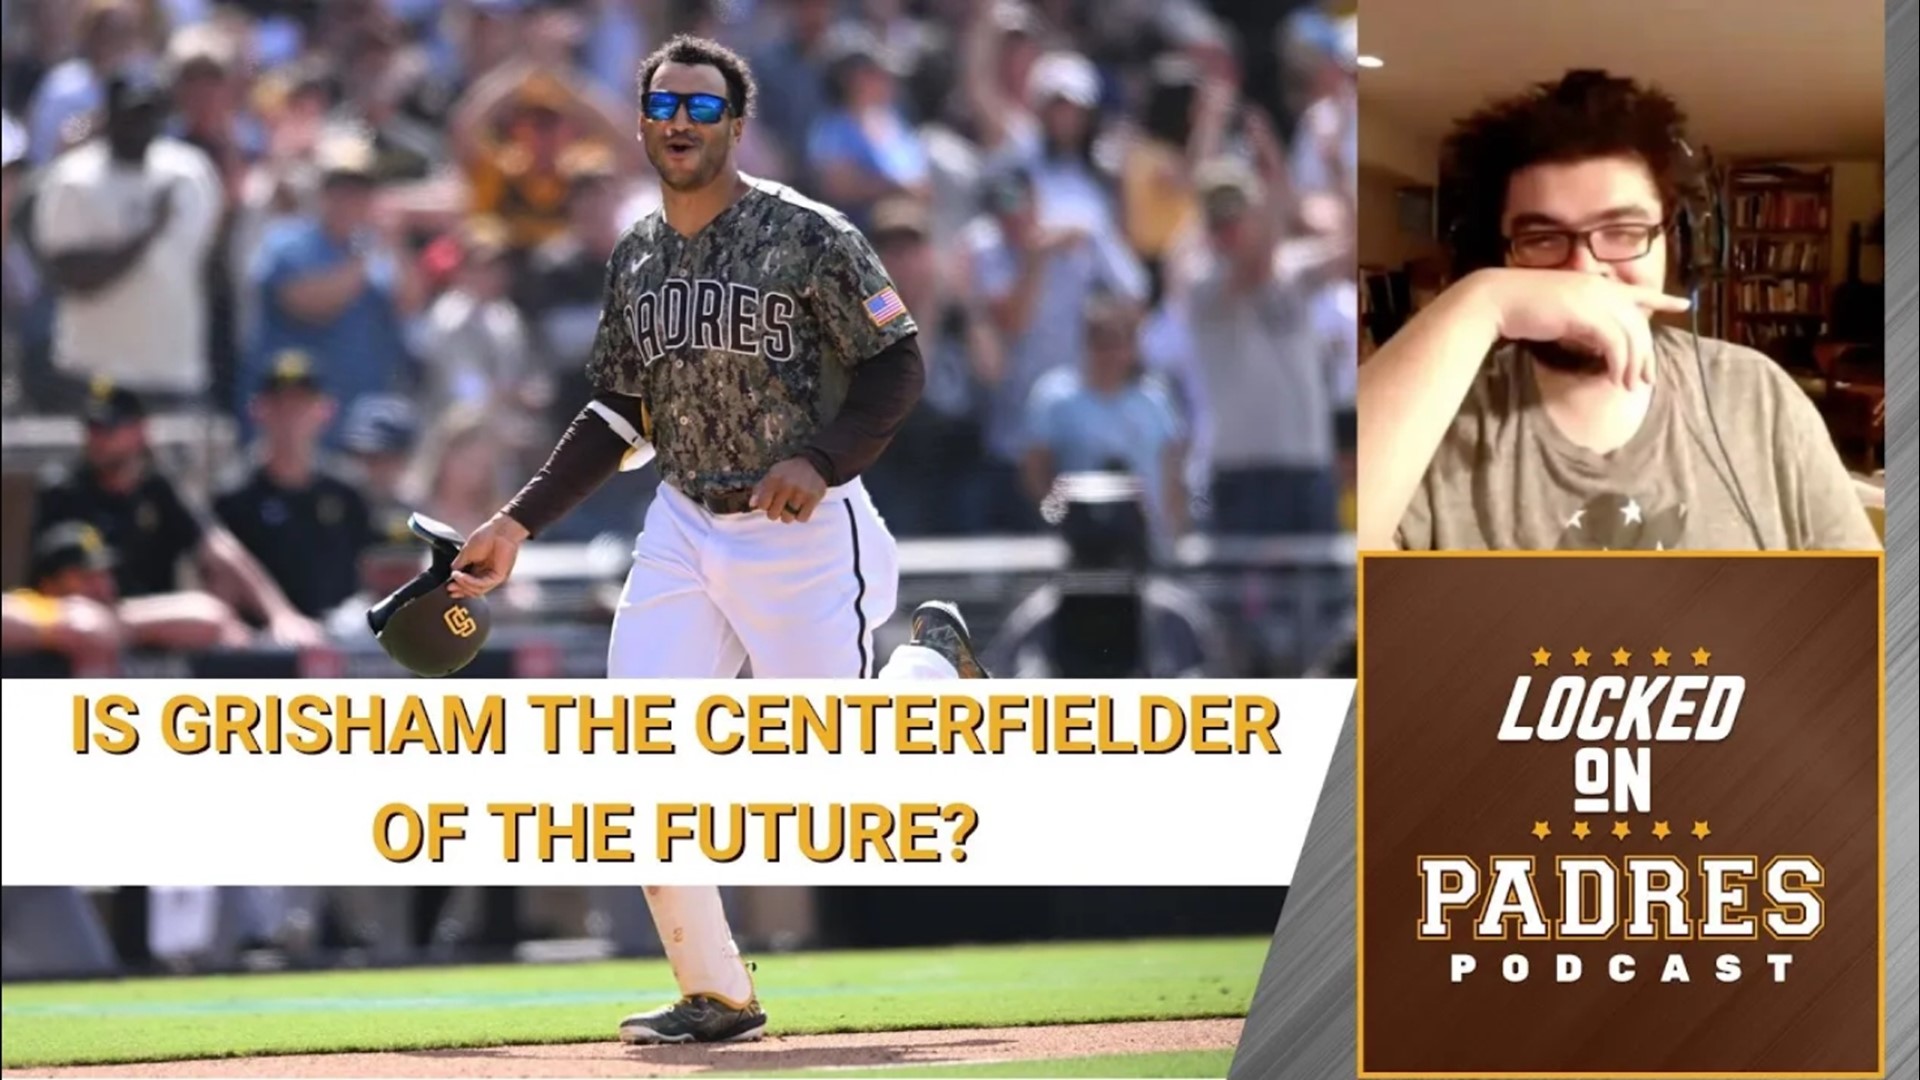 One of the most divisive players in the MLB. Javier continues his player review series by discussing centerfielder Trent Grisham's 2022 season with the Padres.